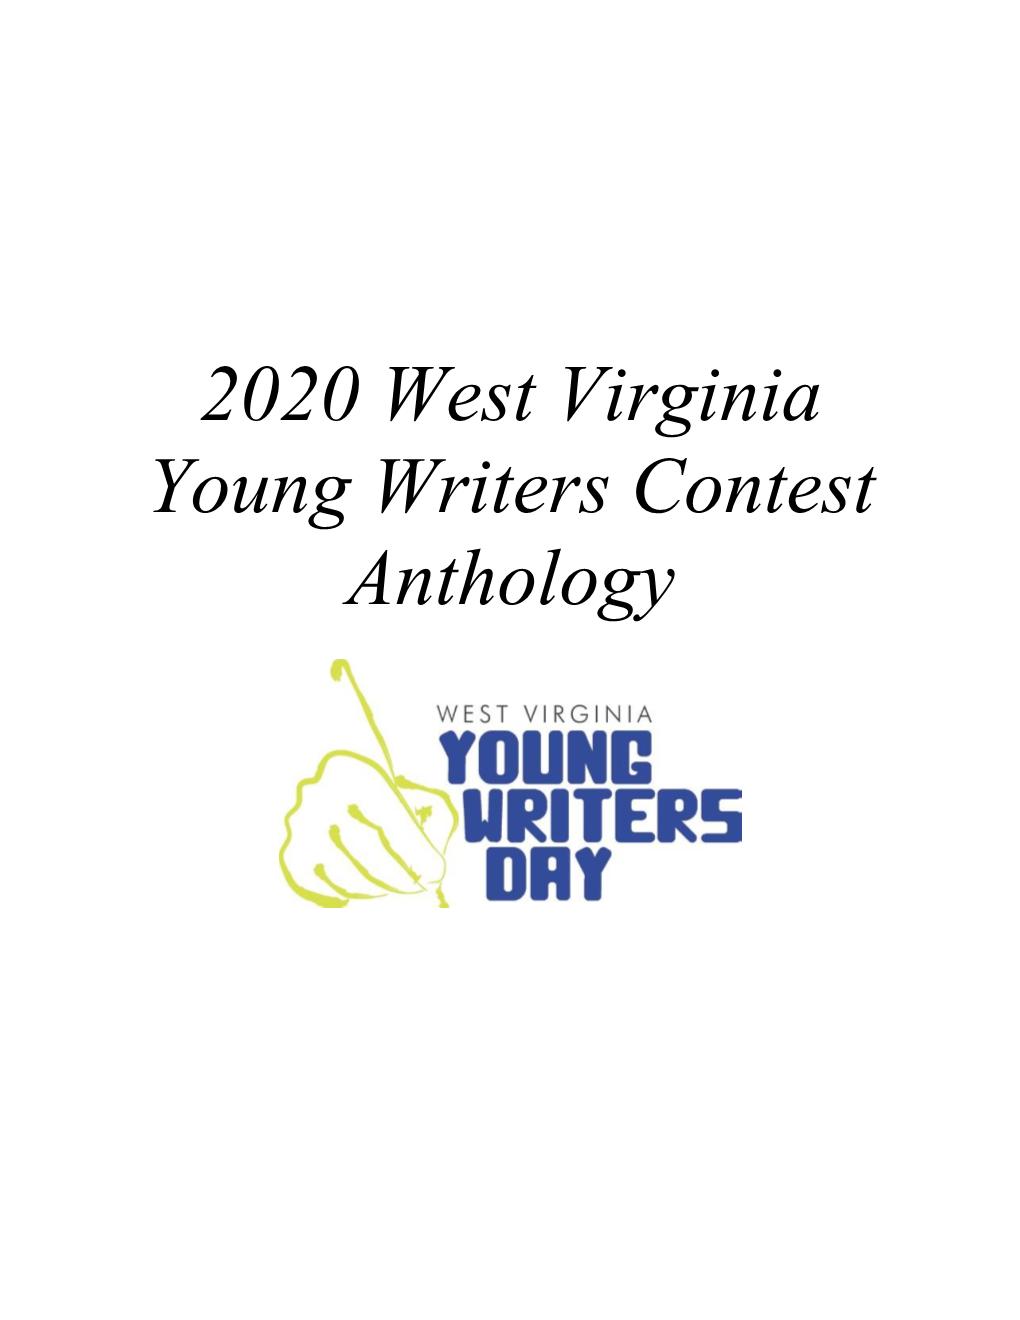 2020 West Virginia Young Writers Contest Anthology